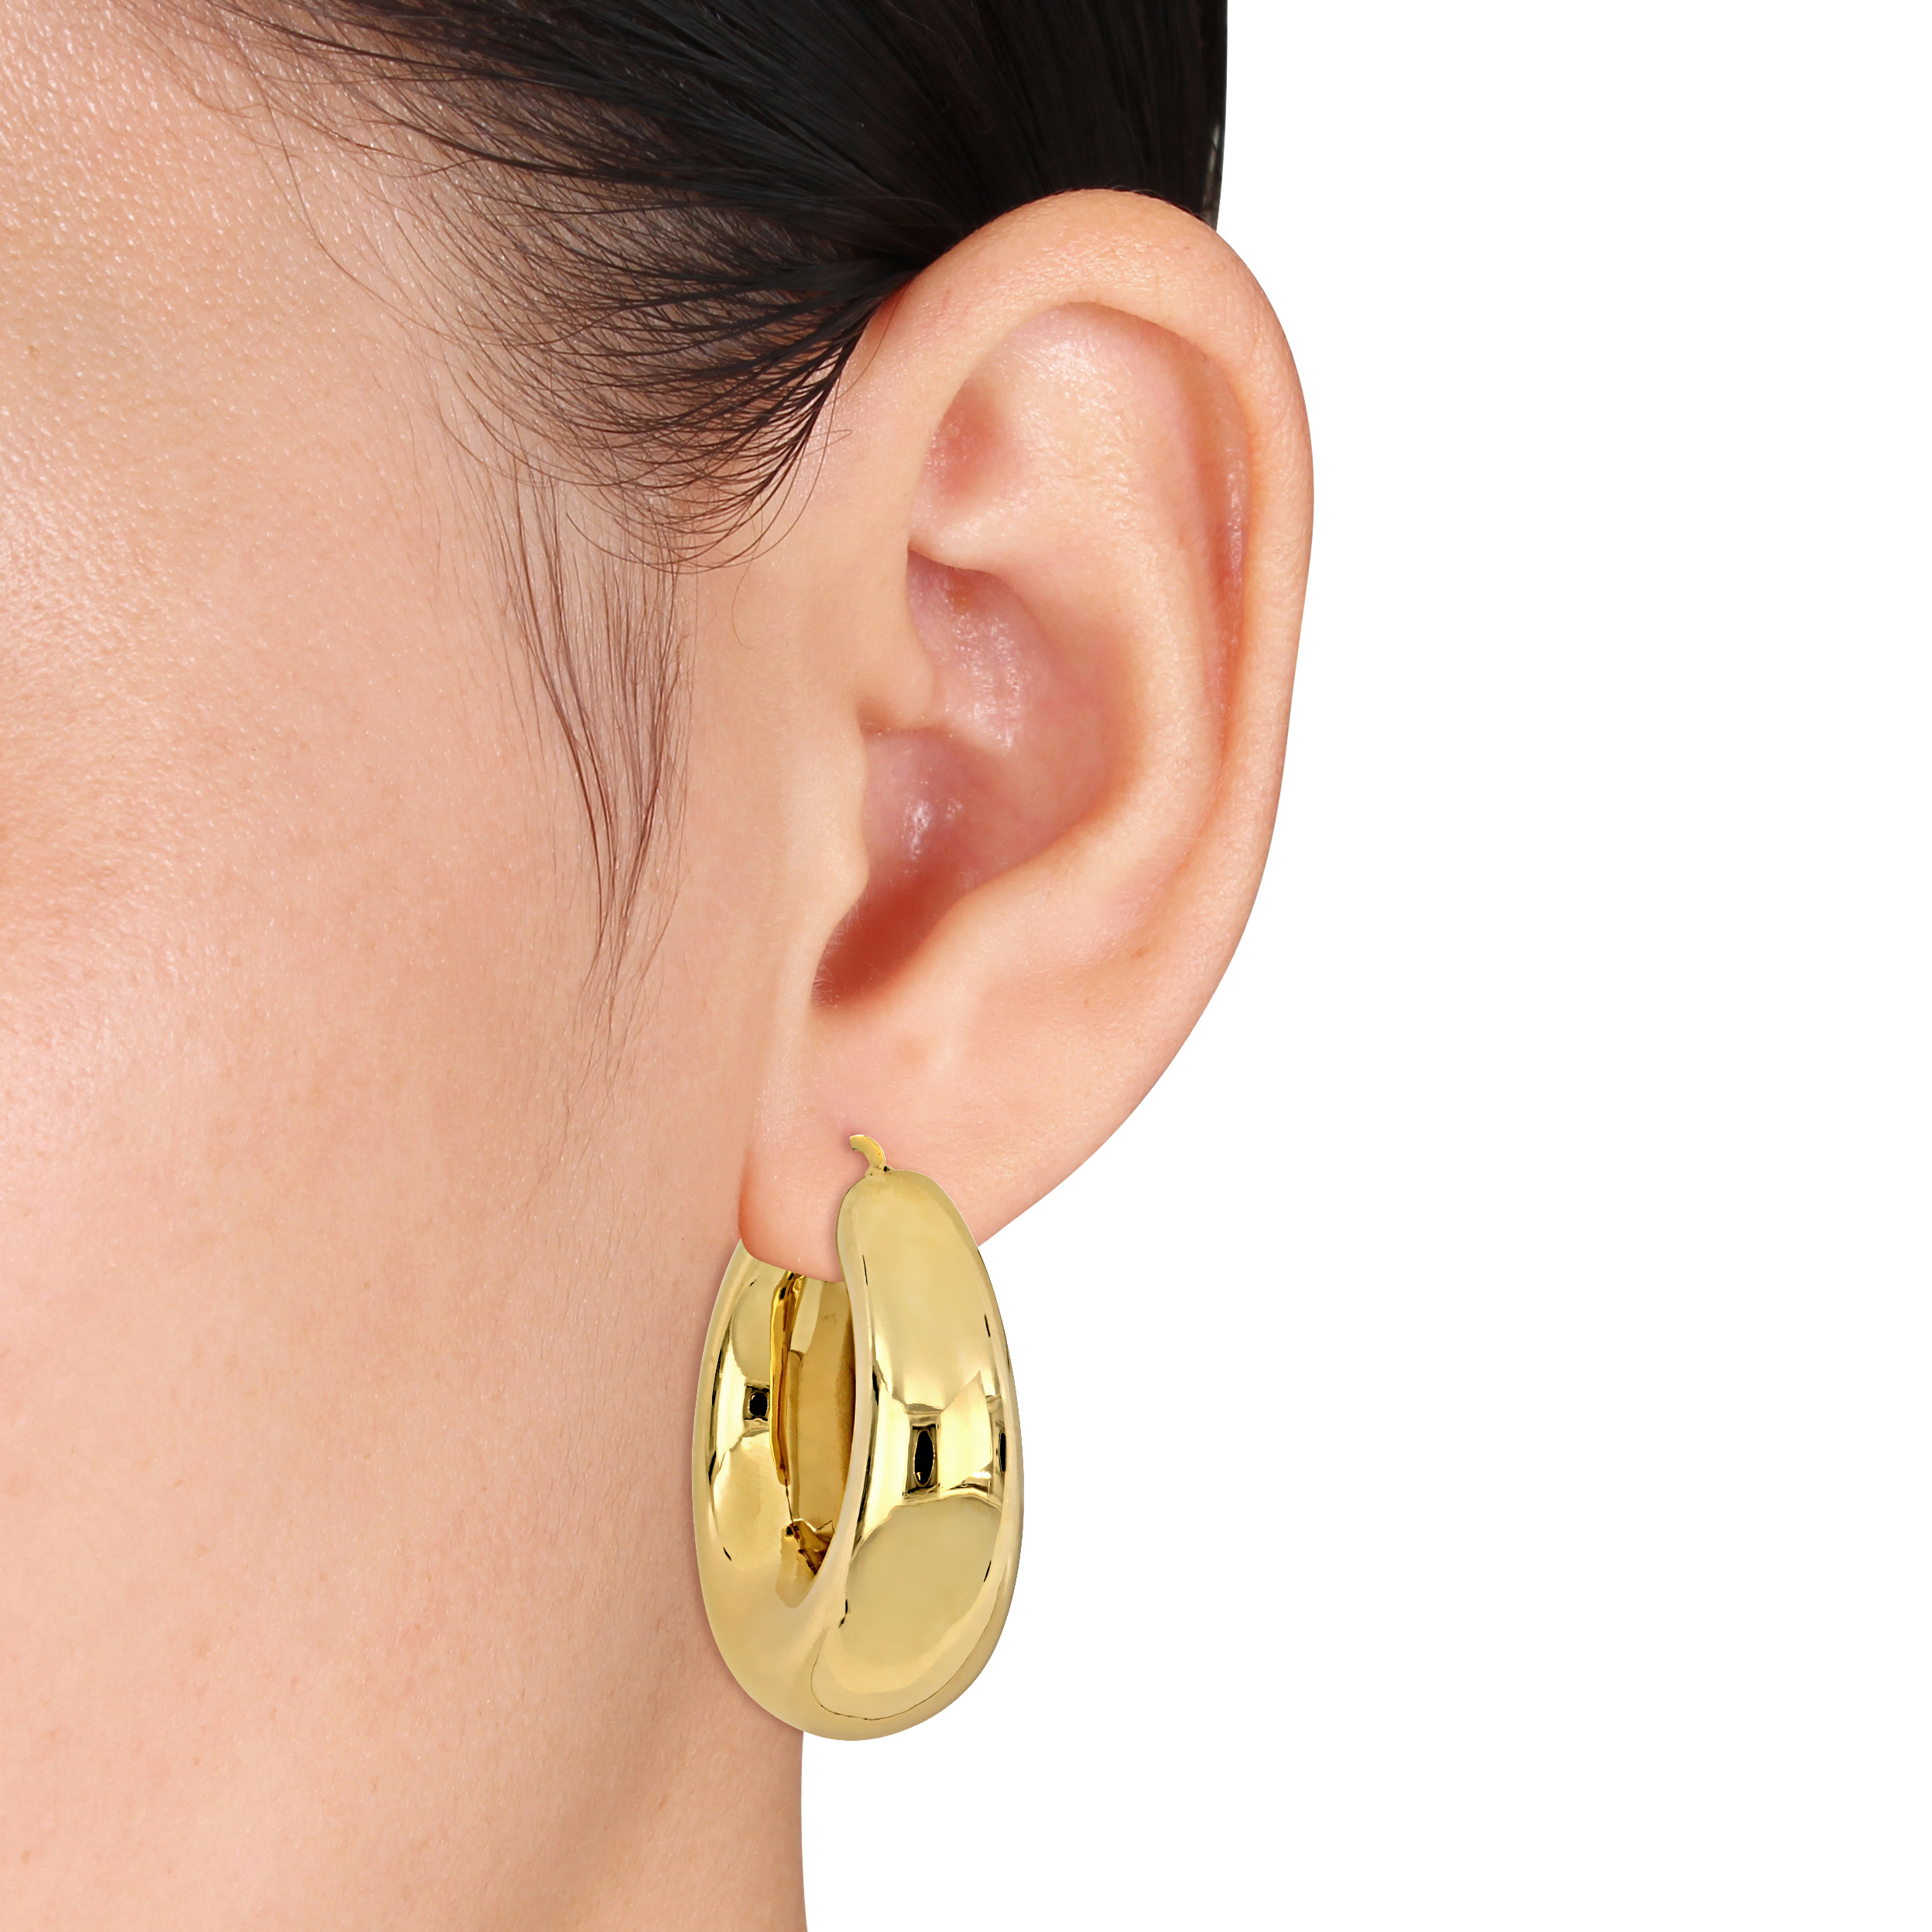 40 MM Polished Hoop Earrings in Yellow Plated Sterling Silver